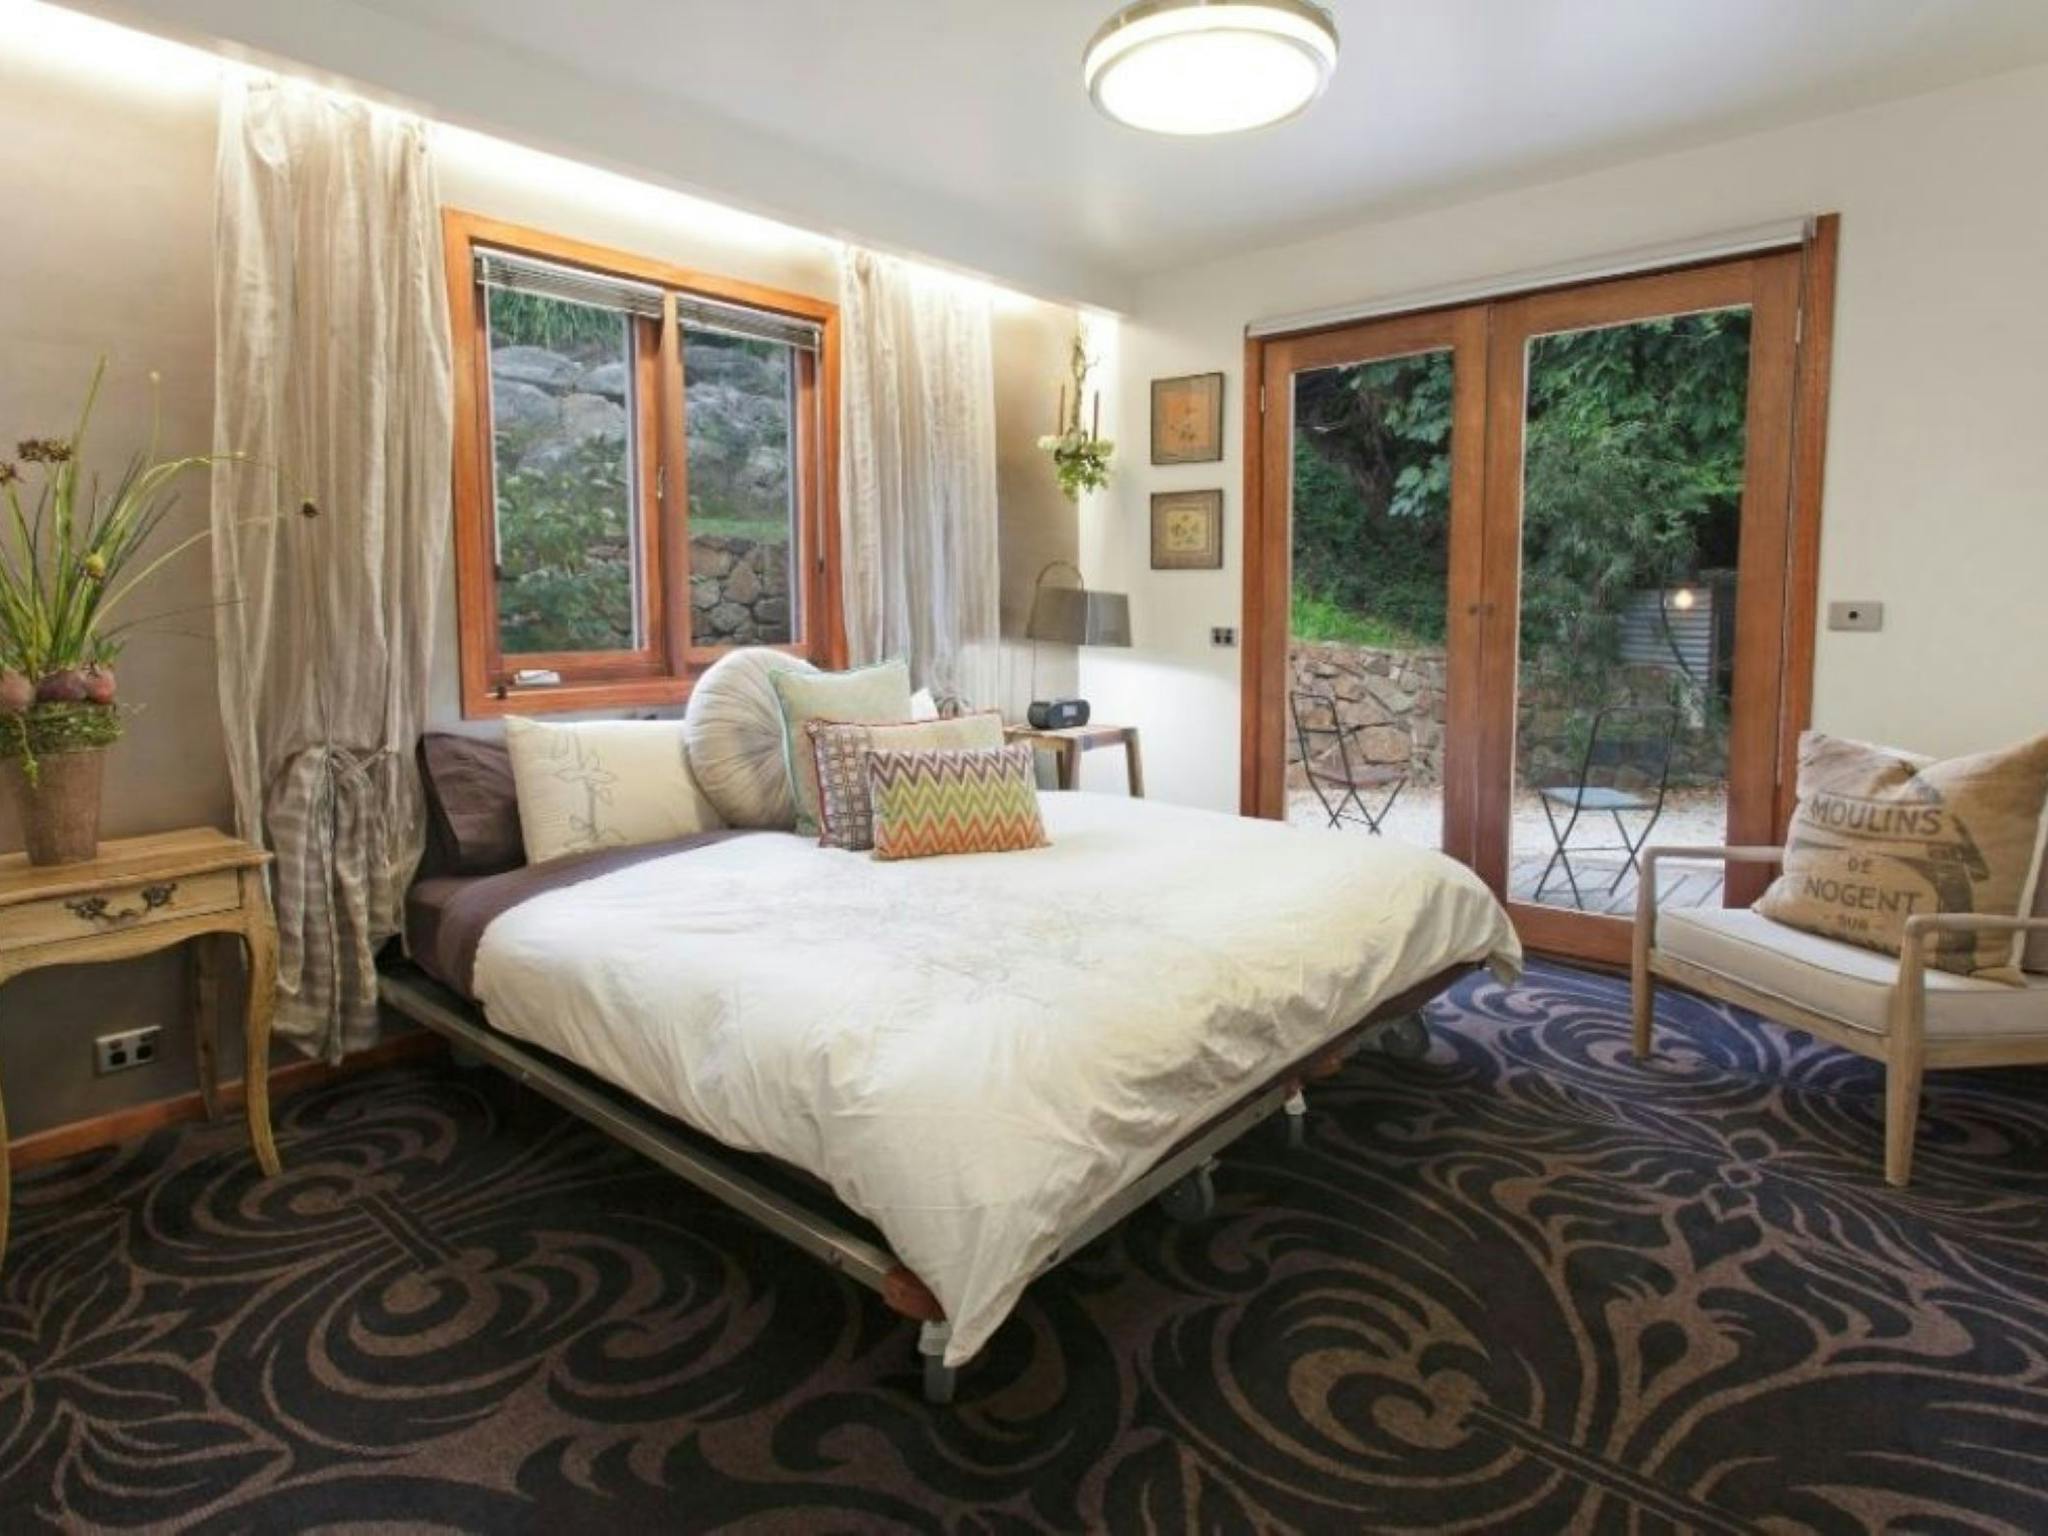 The ground floor bedroom opens directly onto the timber deck and has views to the garden and stream.